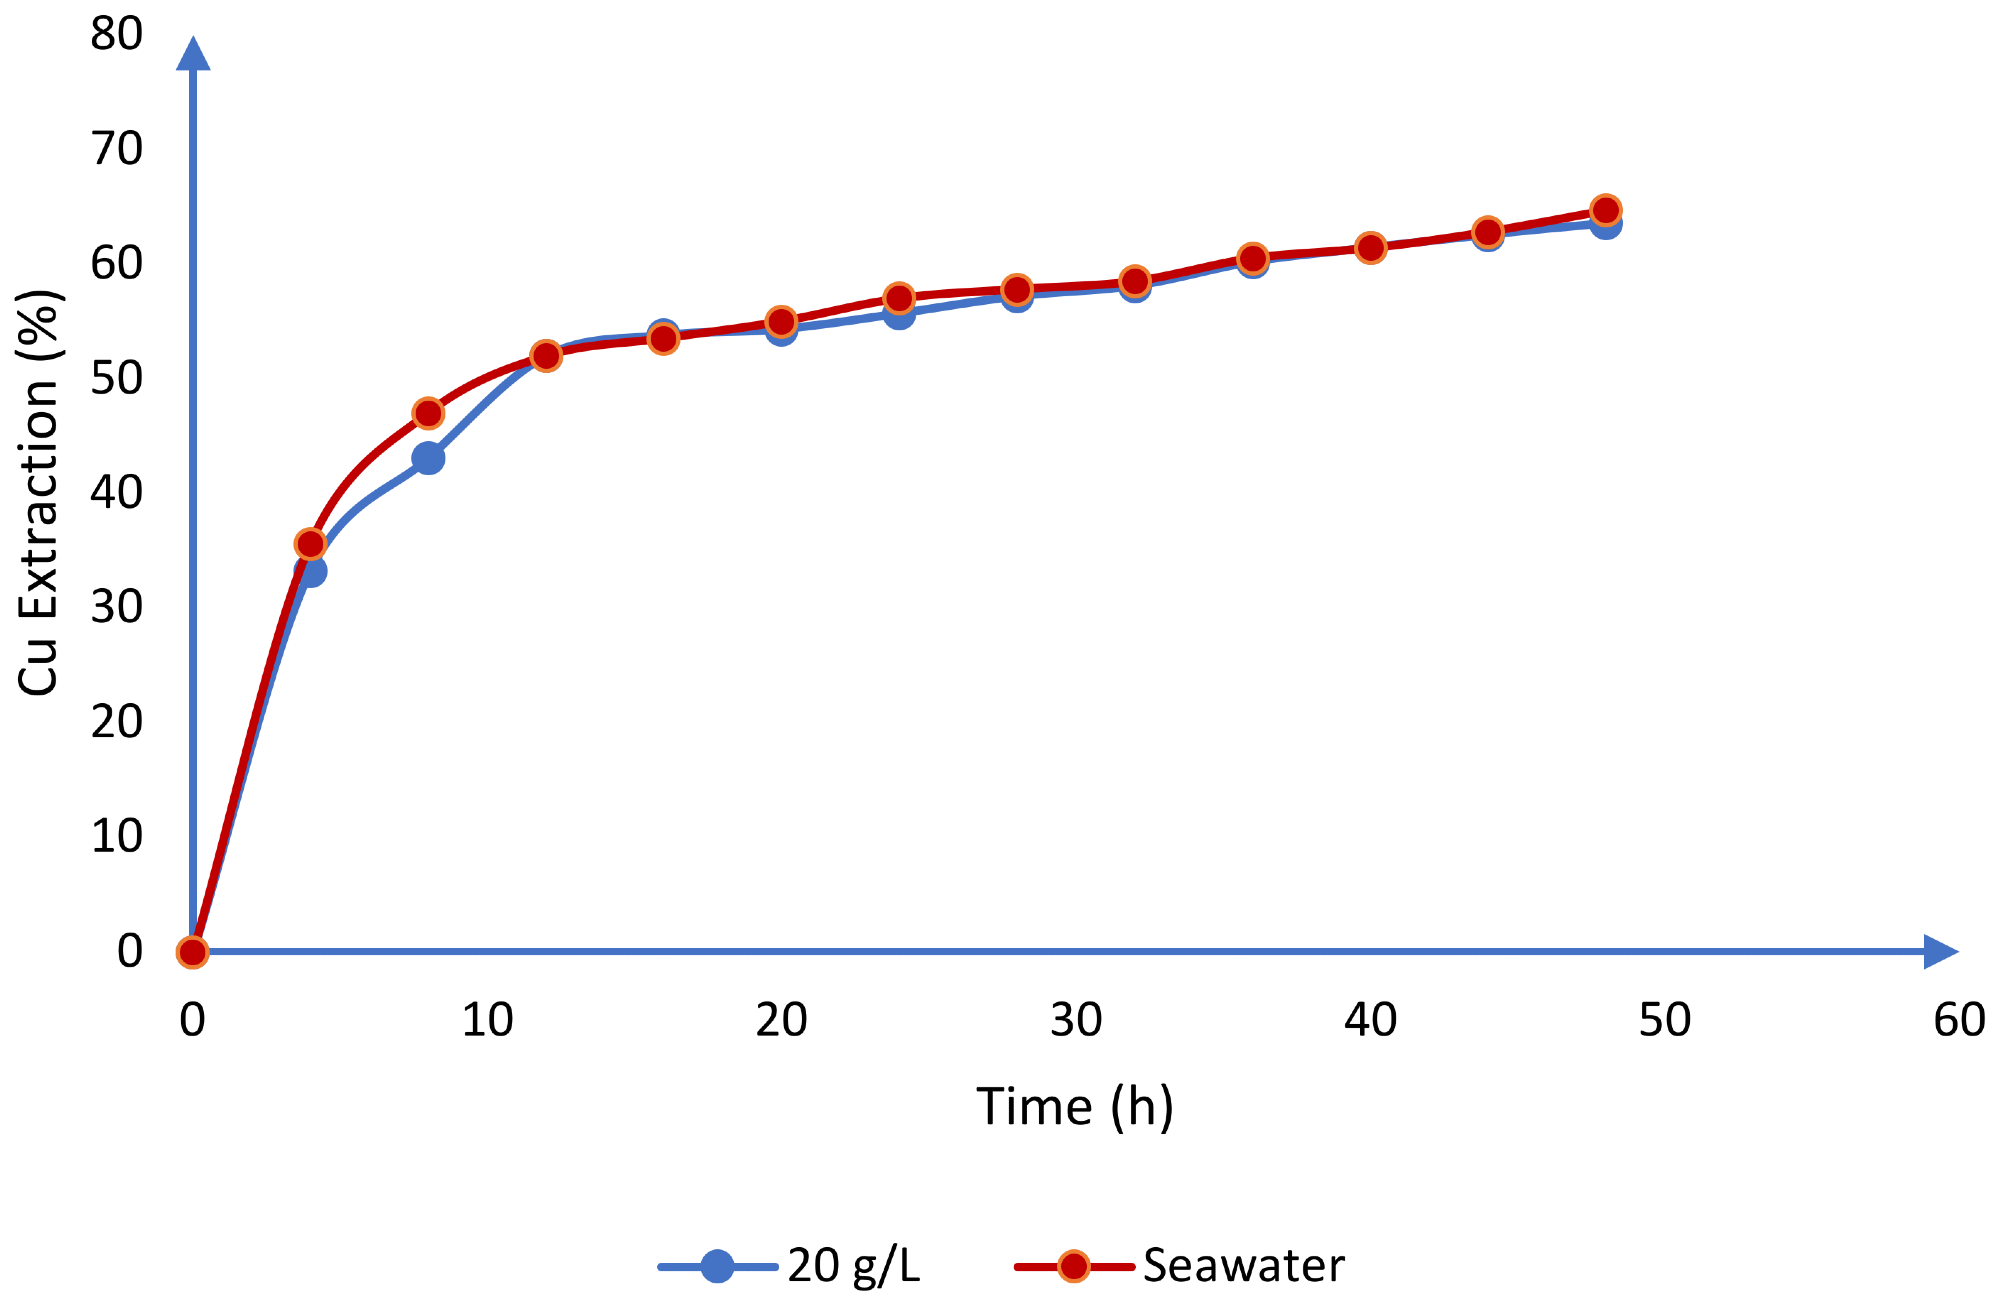 Comparison between the use of seawater and synthetic chloride (20 g/L) for the dissolution of chalcocite in an acid medium (T = 25 °C, H2SO4 = 0.5 mol/L).